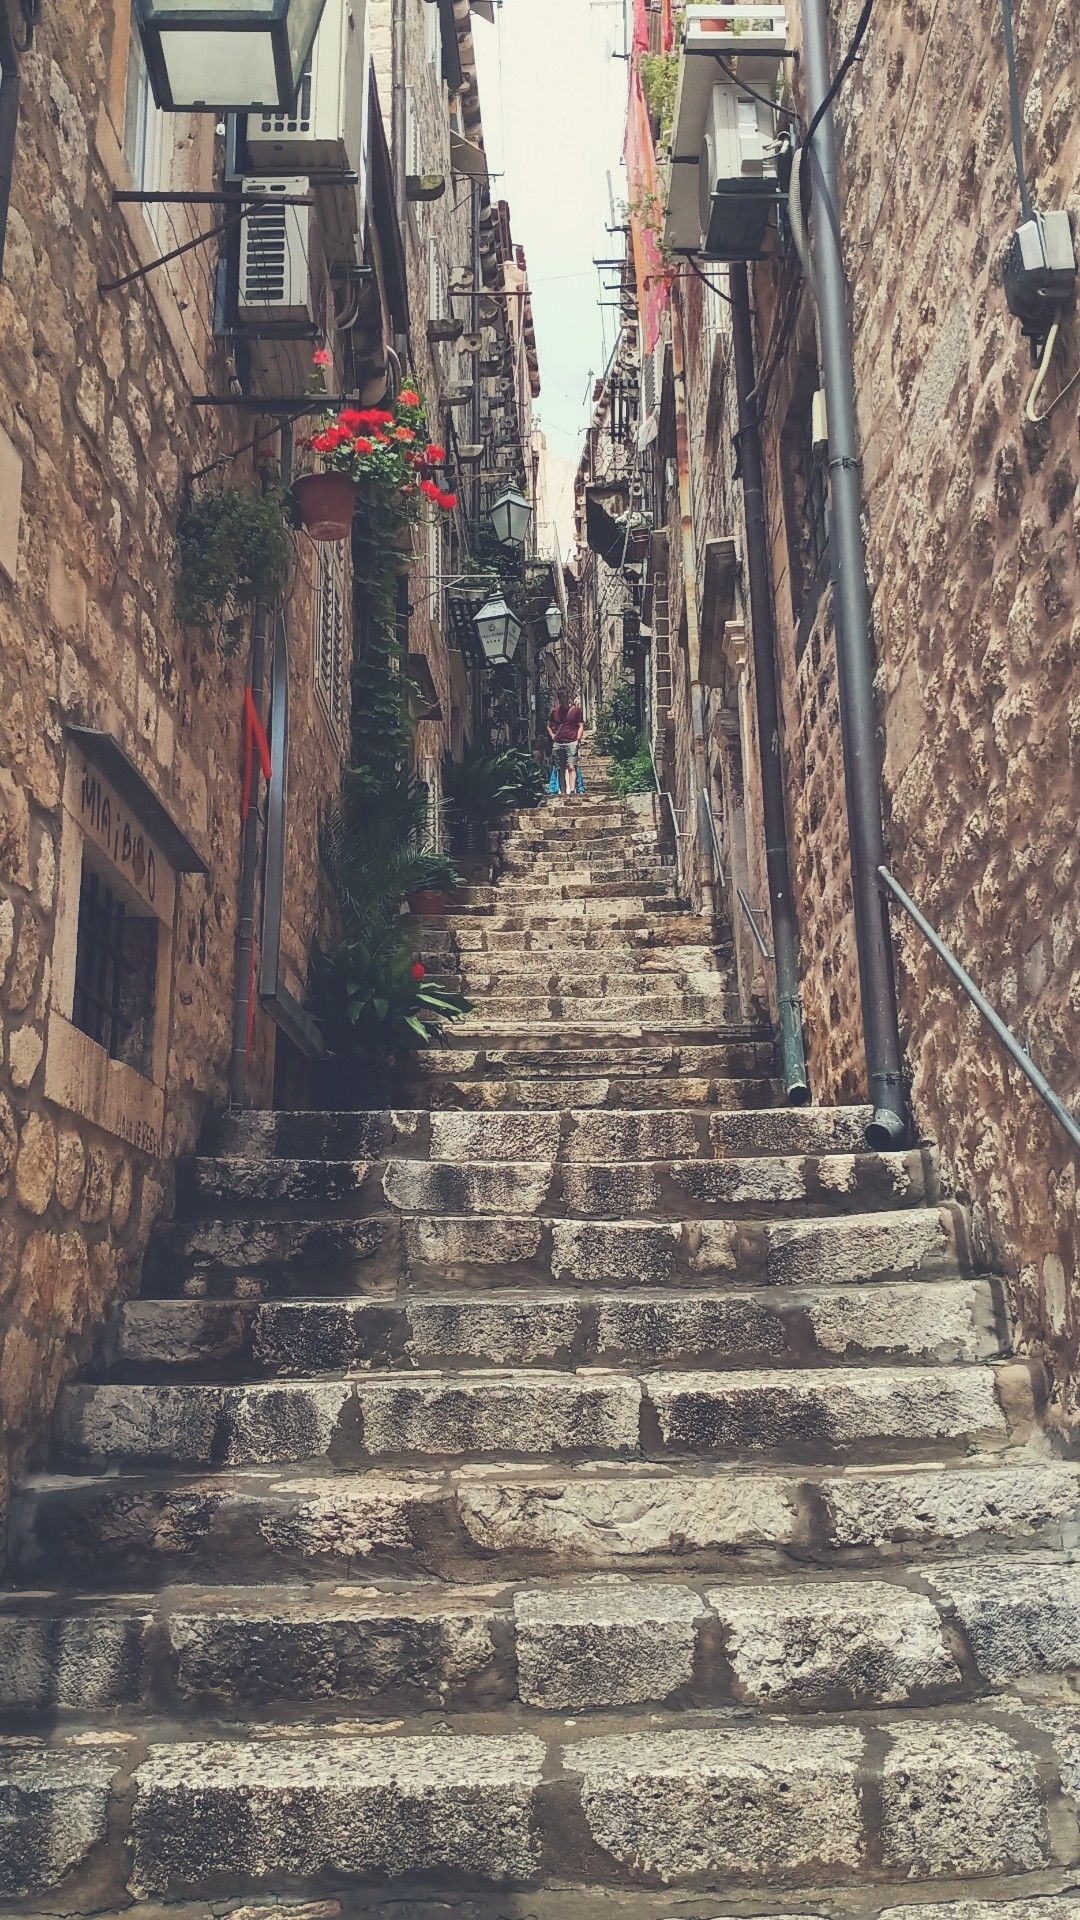 Alley: Cobblestone stairs, Narrow street, Old town in Europe, Medieval architecture, Traveling. 1080x1920 Full HD Background.